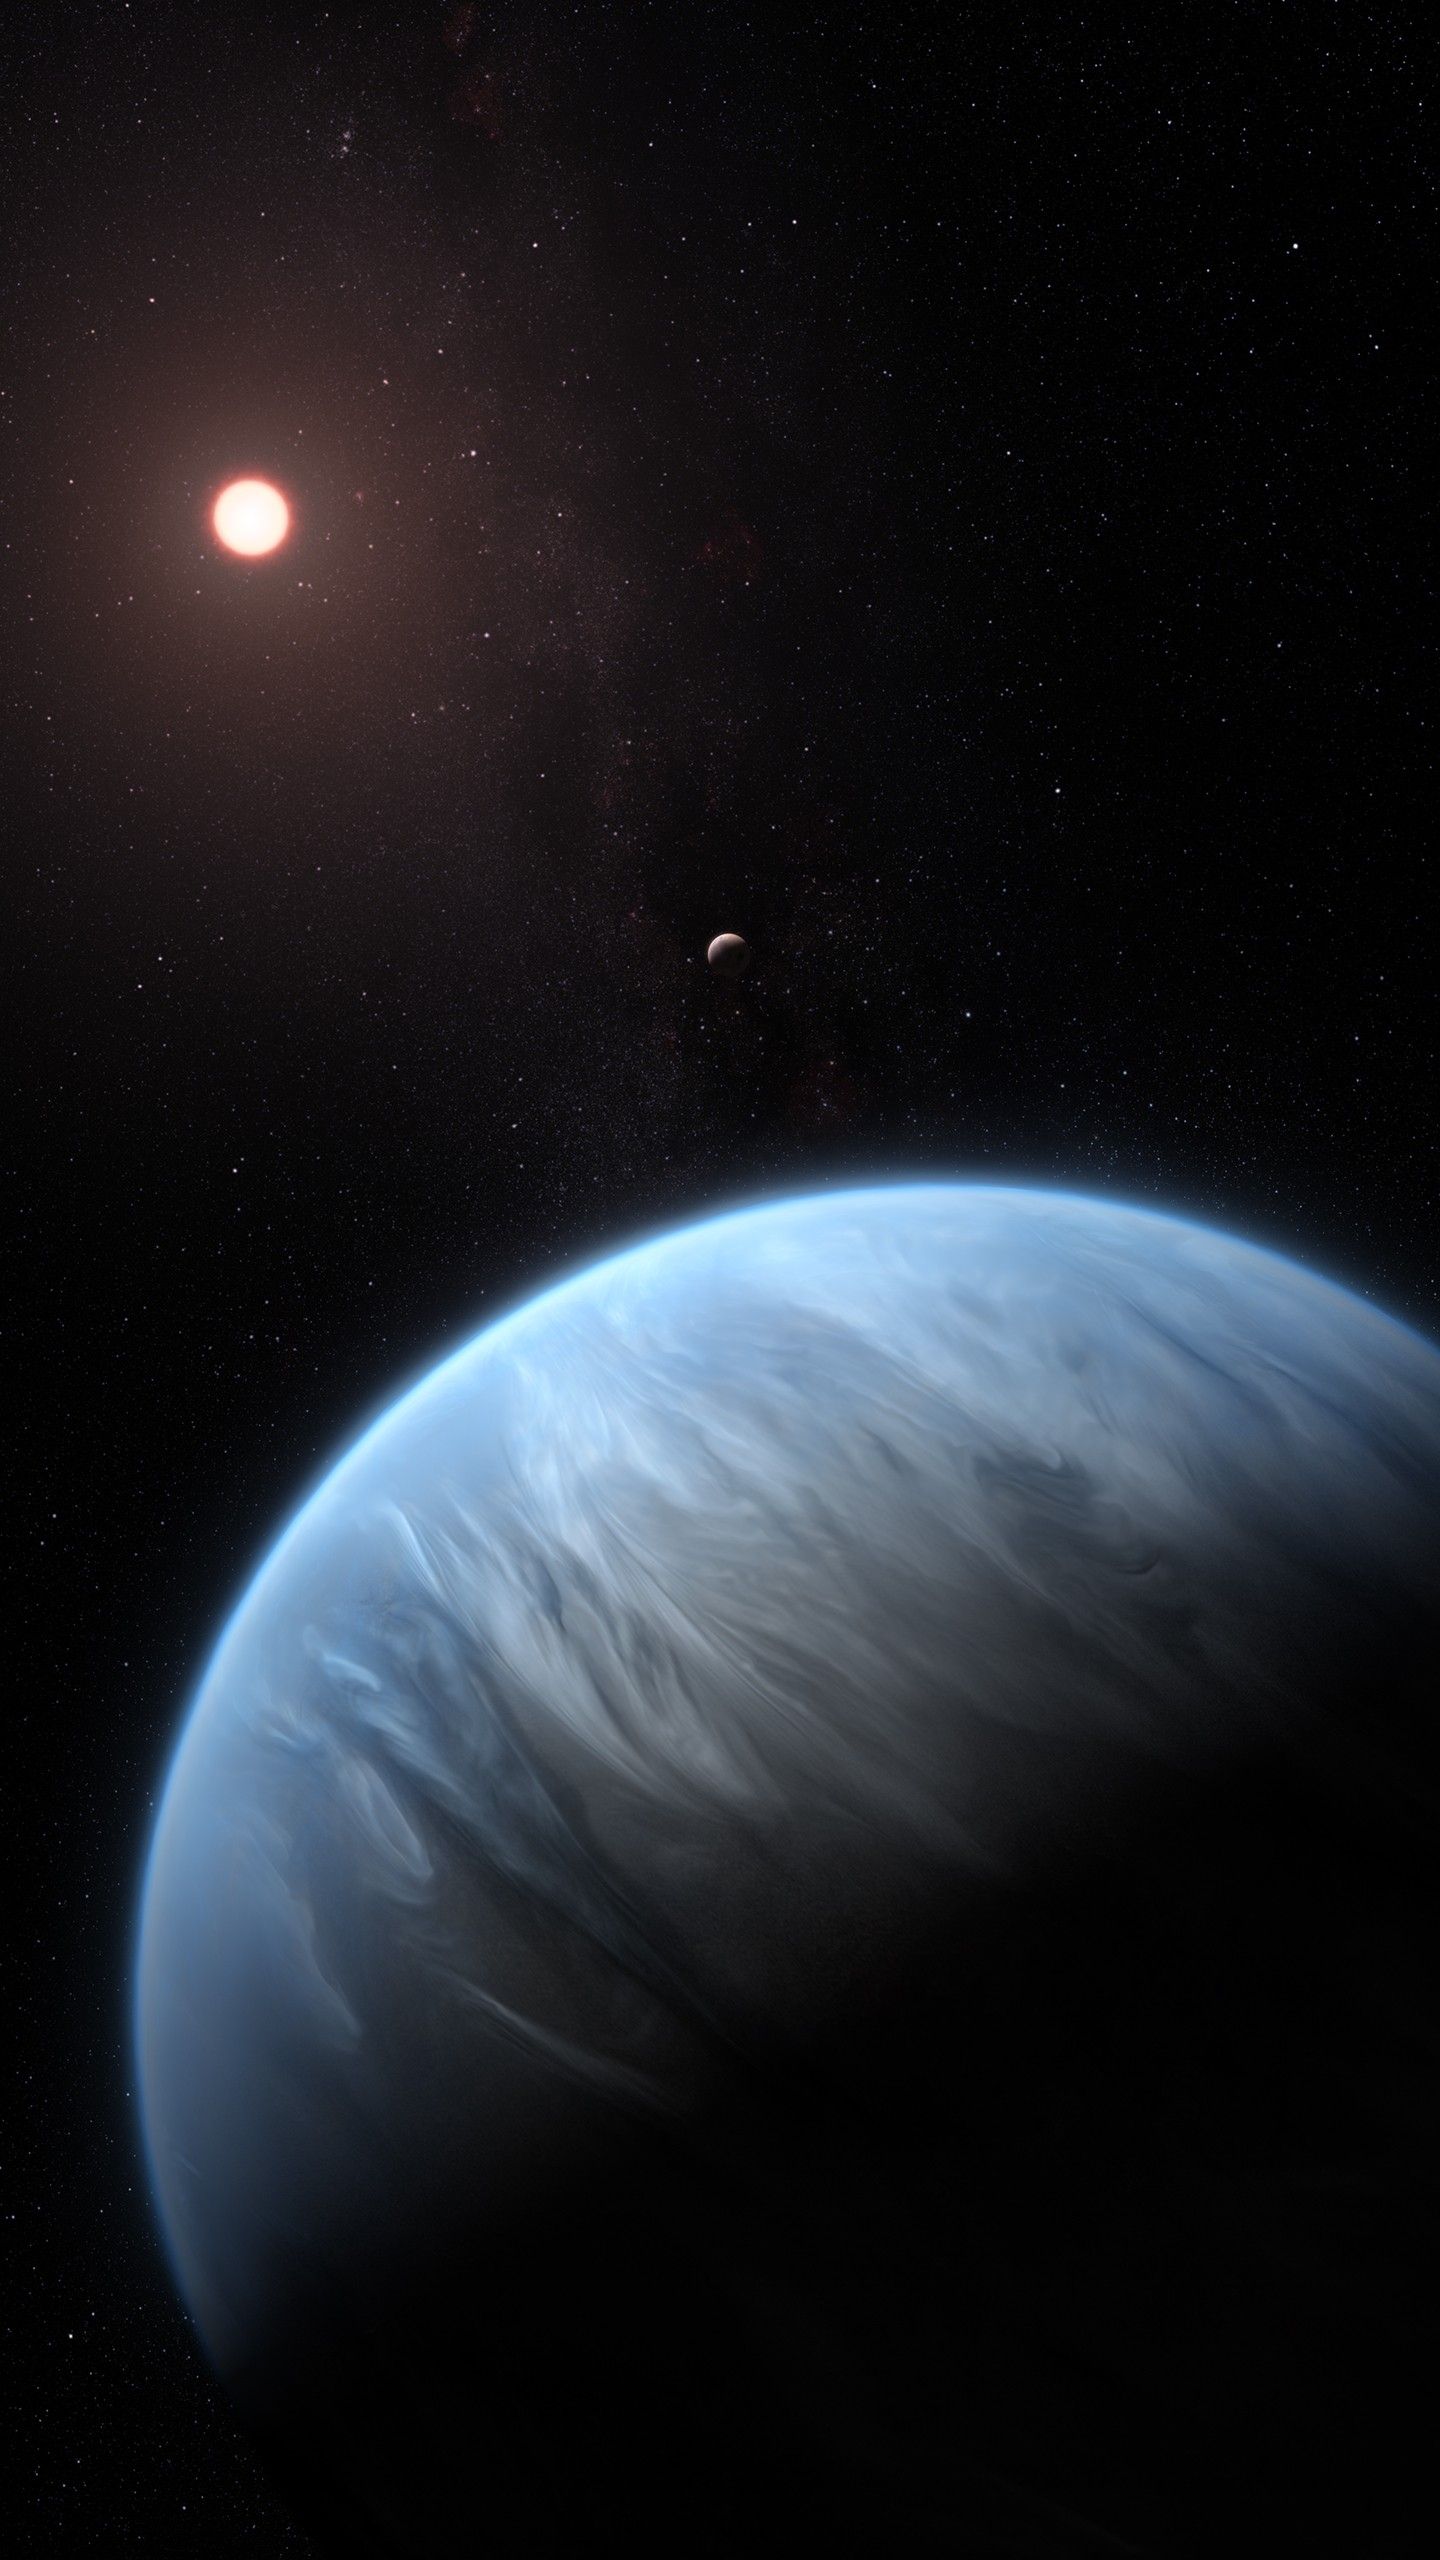 WALLPAPERS HD: Super Earth Exoplanet